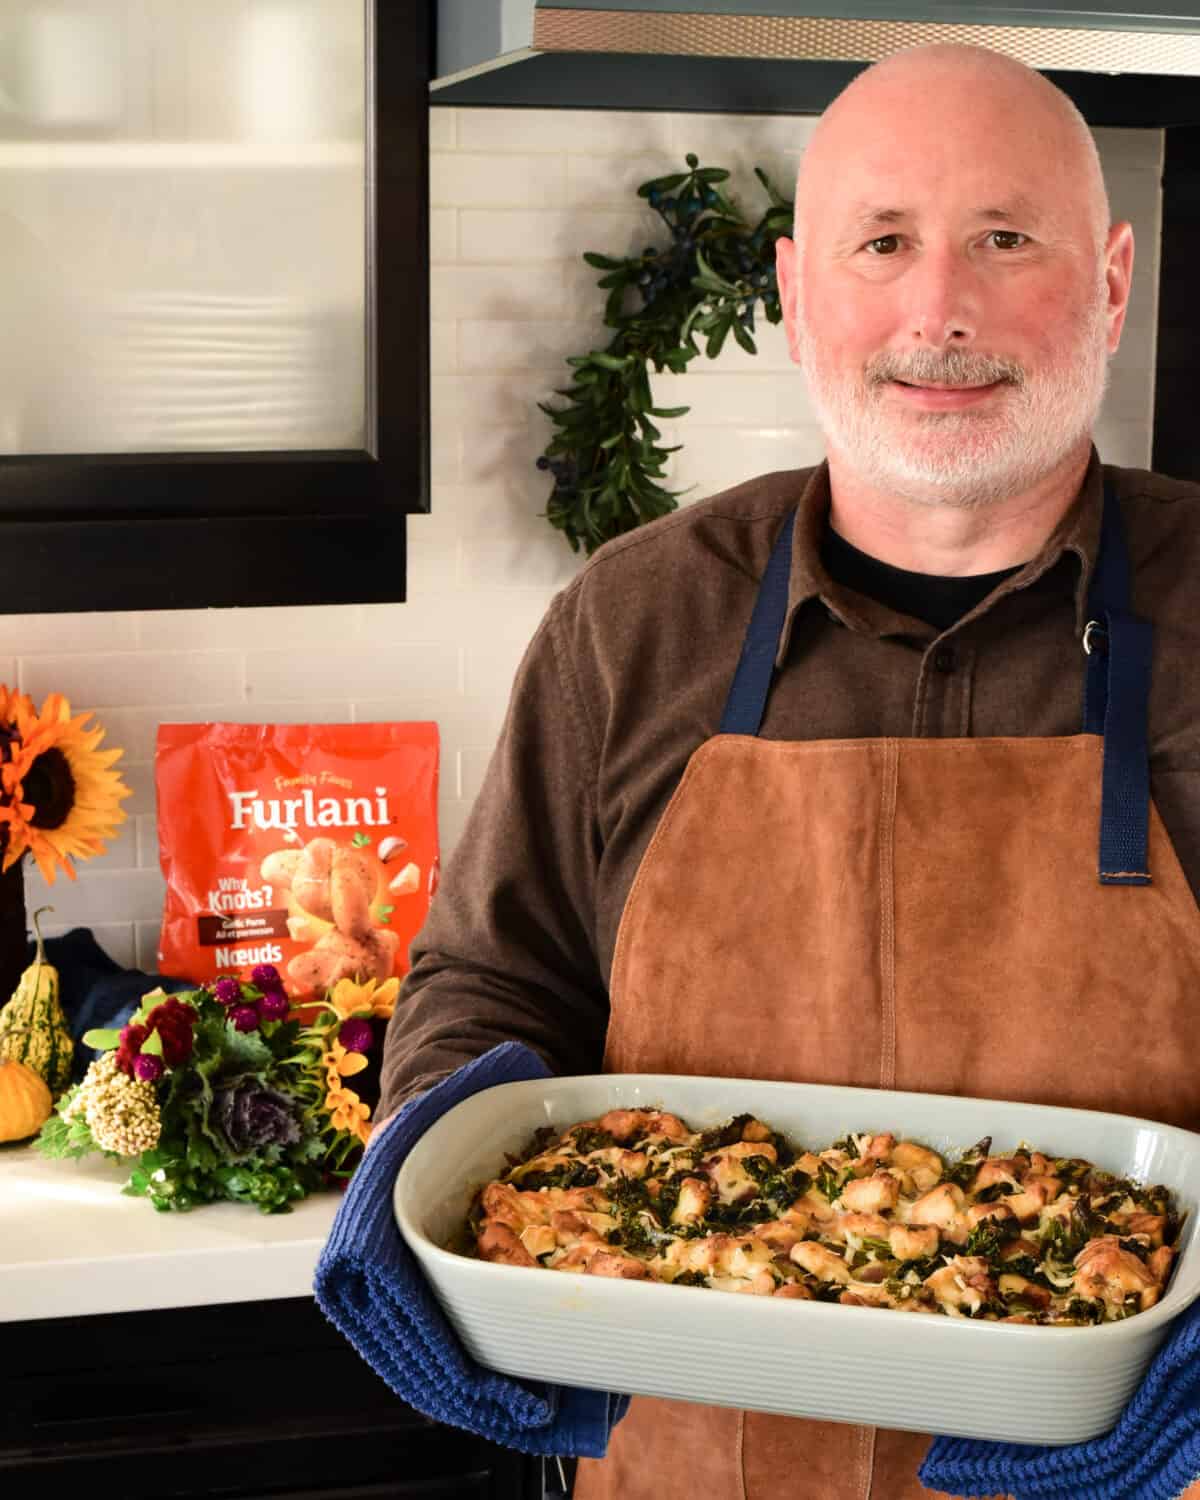 A man in suede apron holding the baking dish in his kitchen with fall flowers in the background.